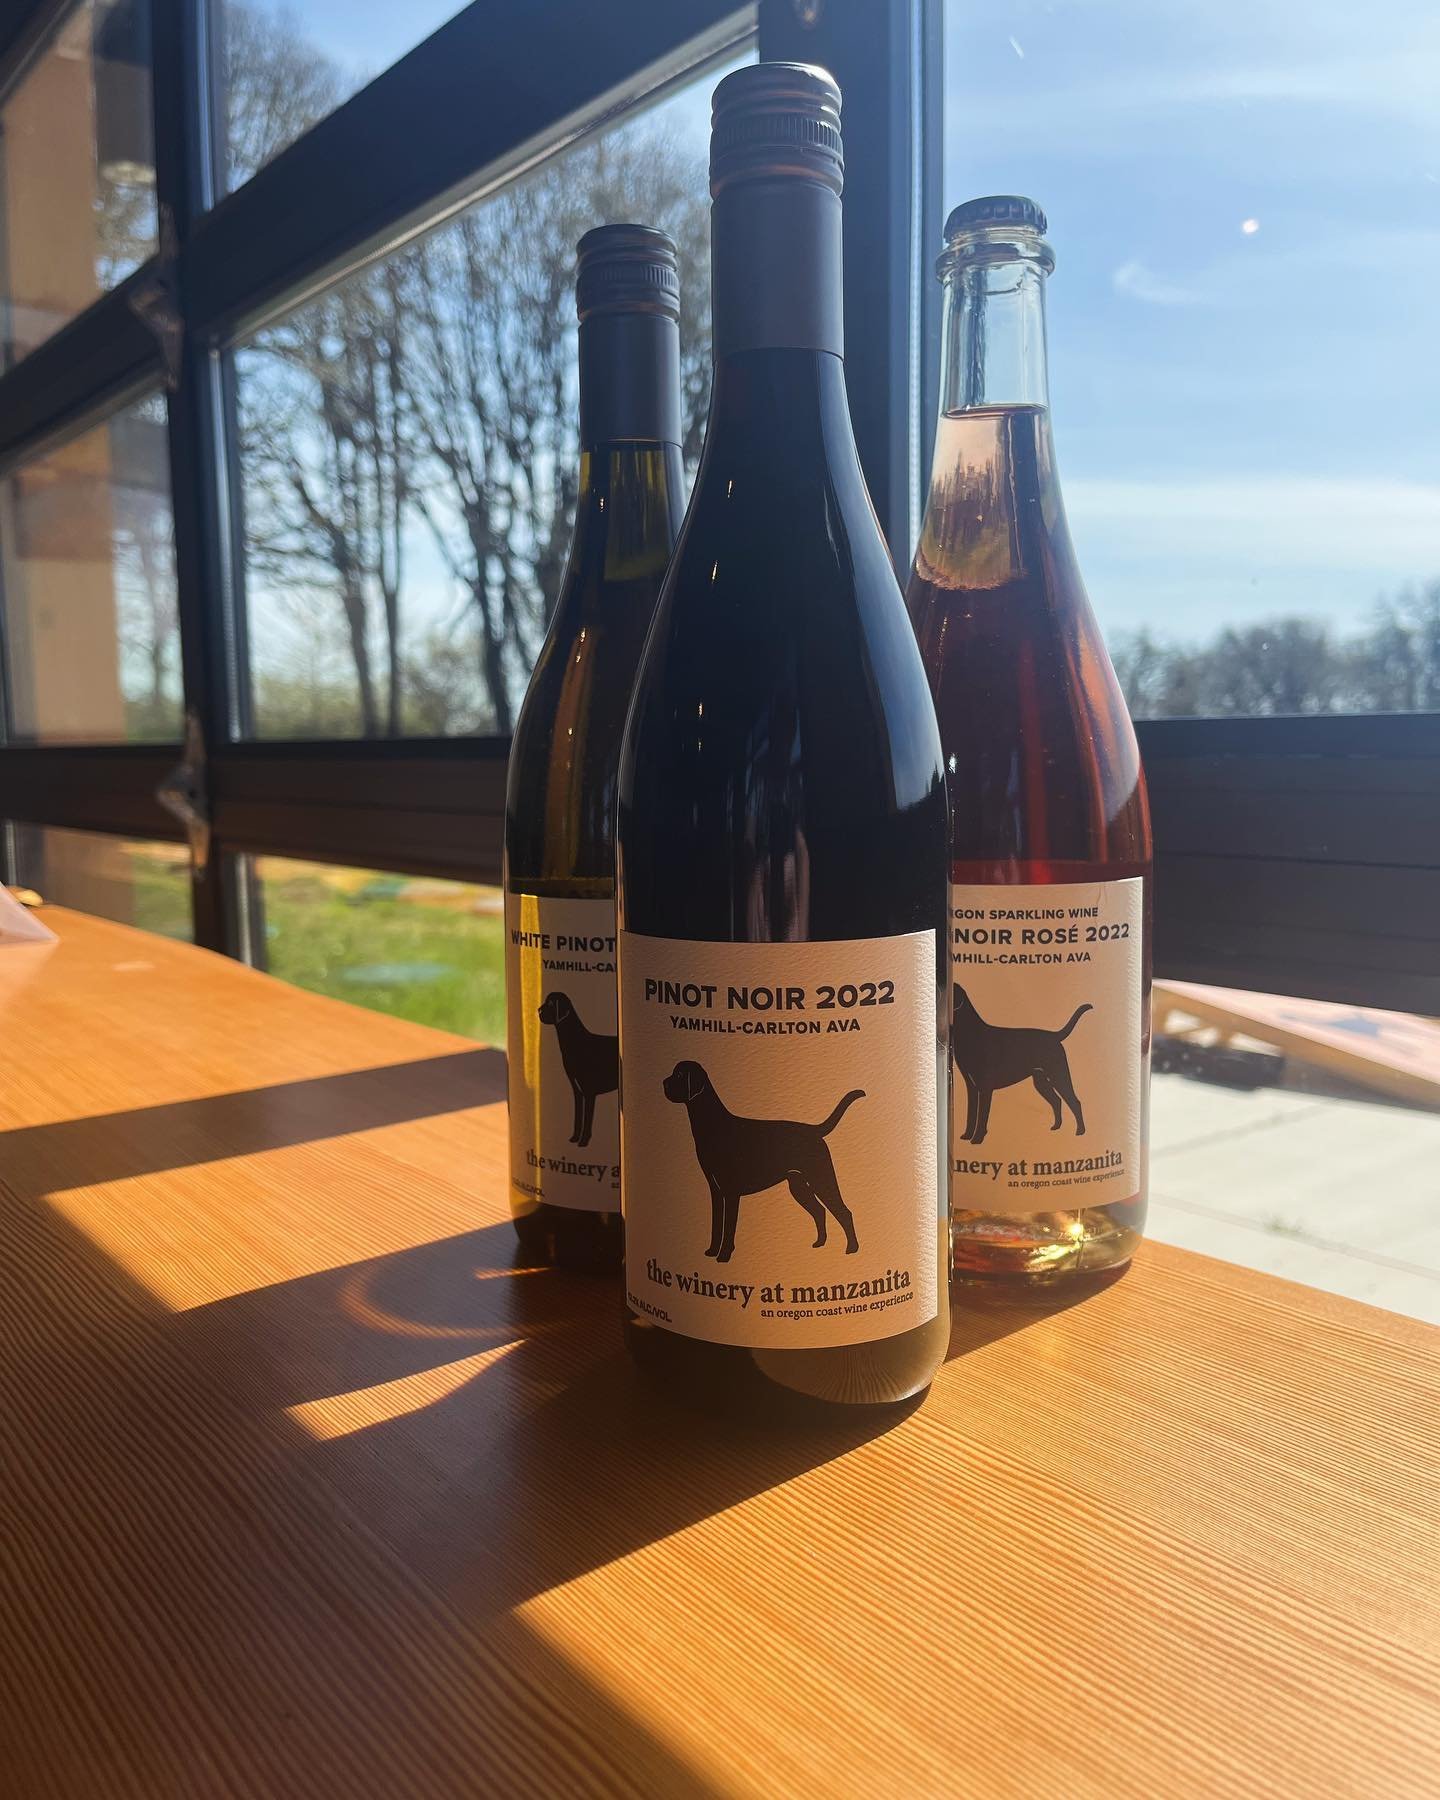 We&rsquo;re so excited for next week&rsquo;s spring tasting with the @yamhillcarlton AVA! We&rsquo;ll be pouring these three killer wines - the 22 #pinotnoir, the 22 #whitepinot and as a special treat for VIPs our 22 #sparklingrose!

Tickets are stil